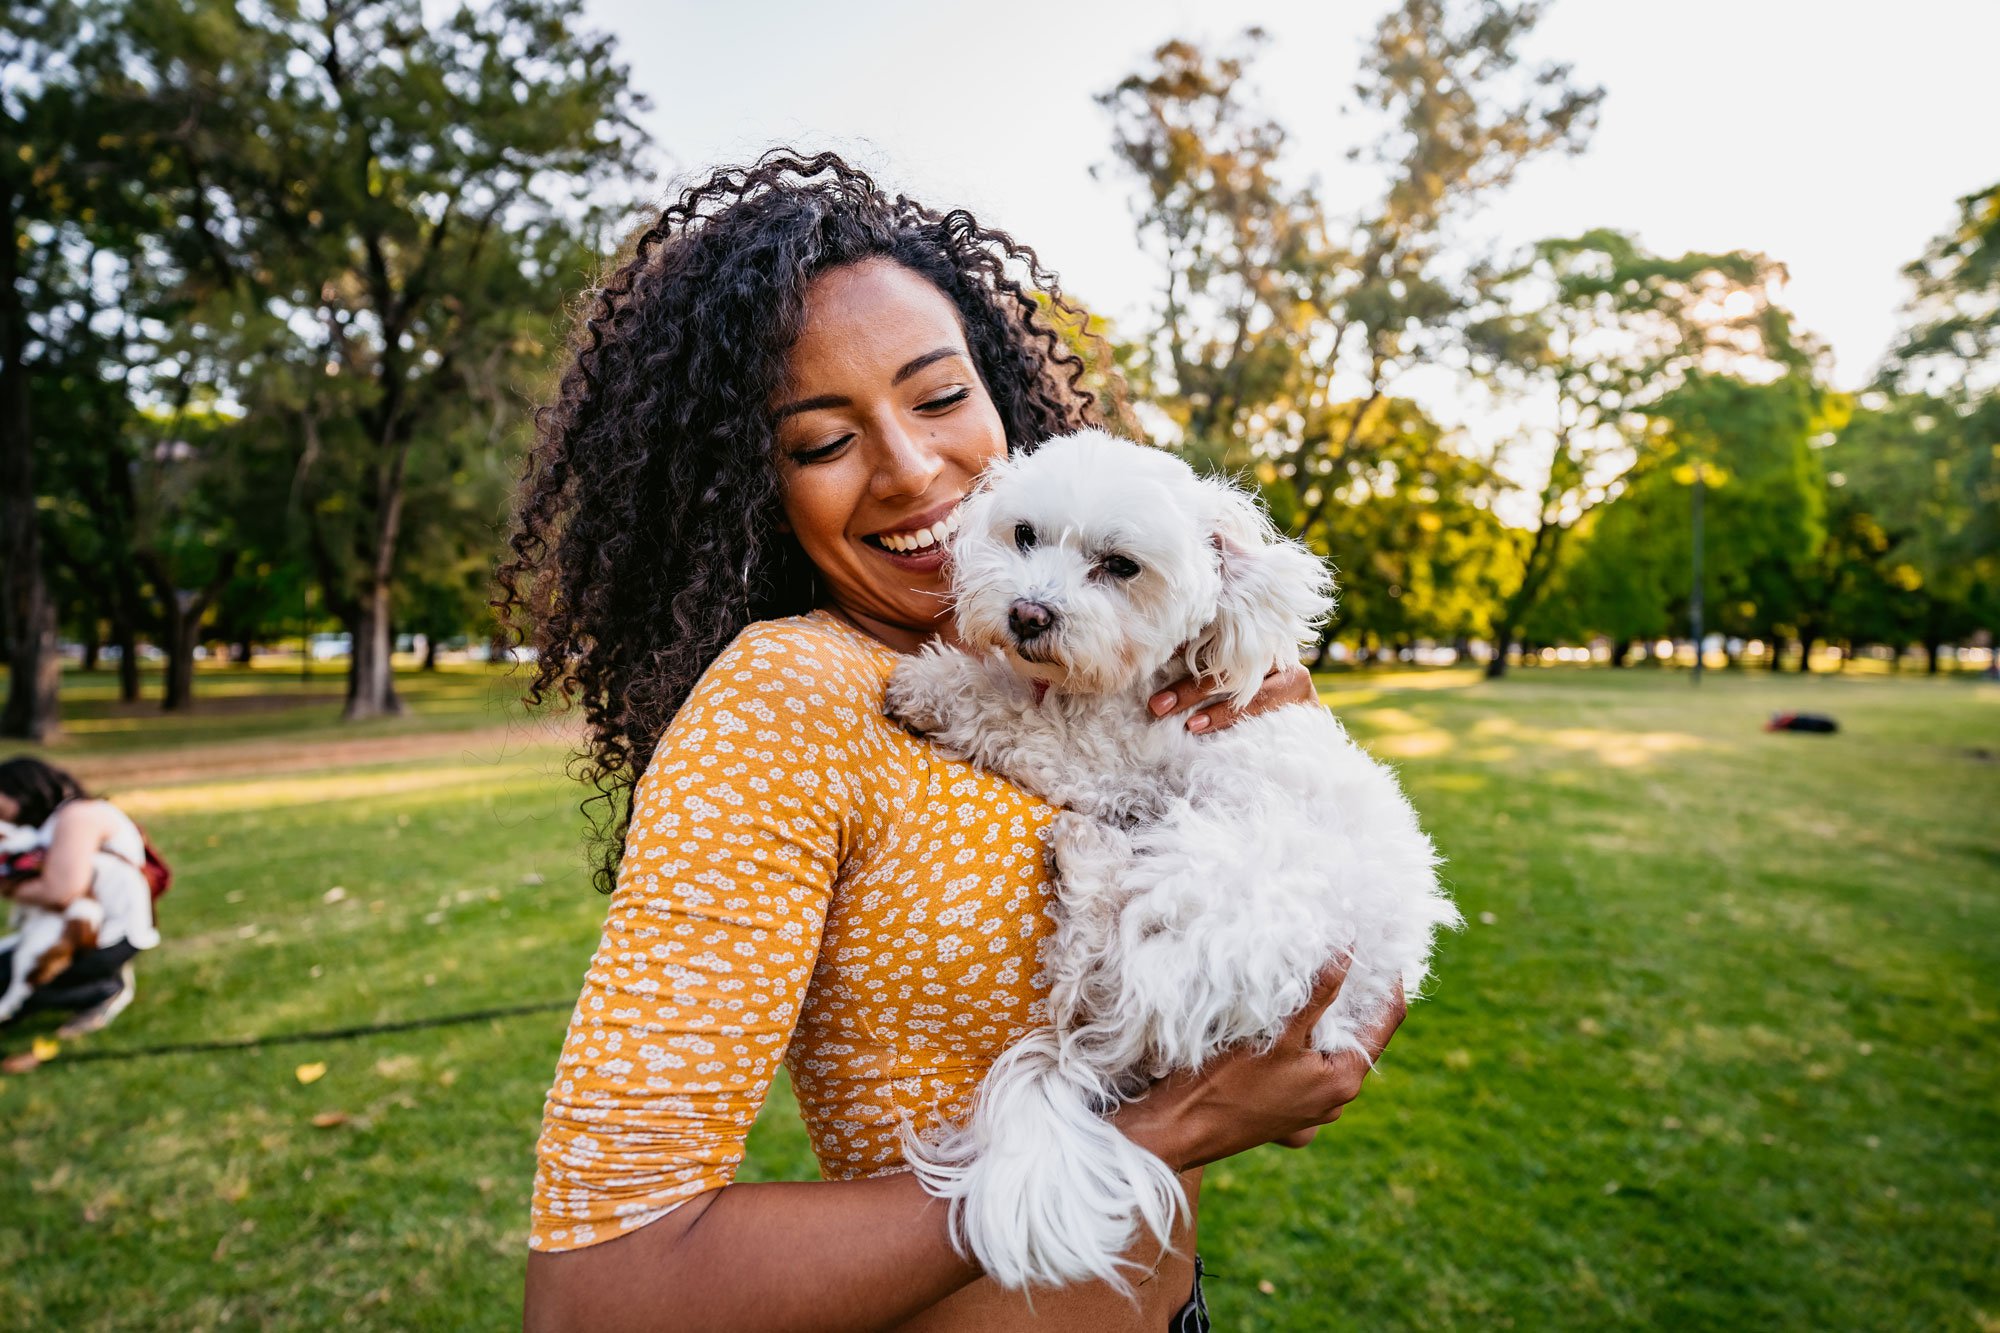 Woman outside holding small white dog